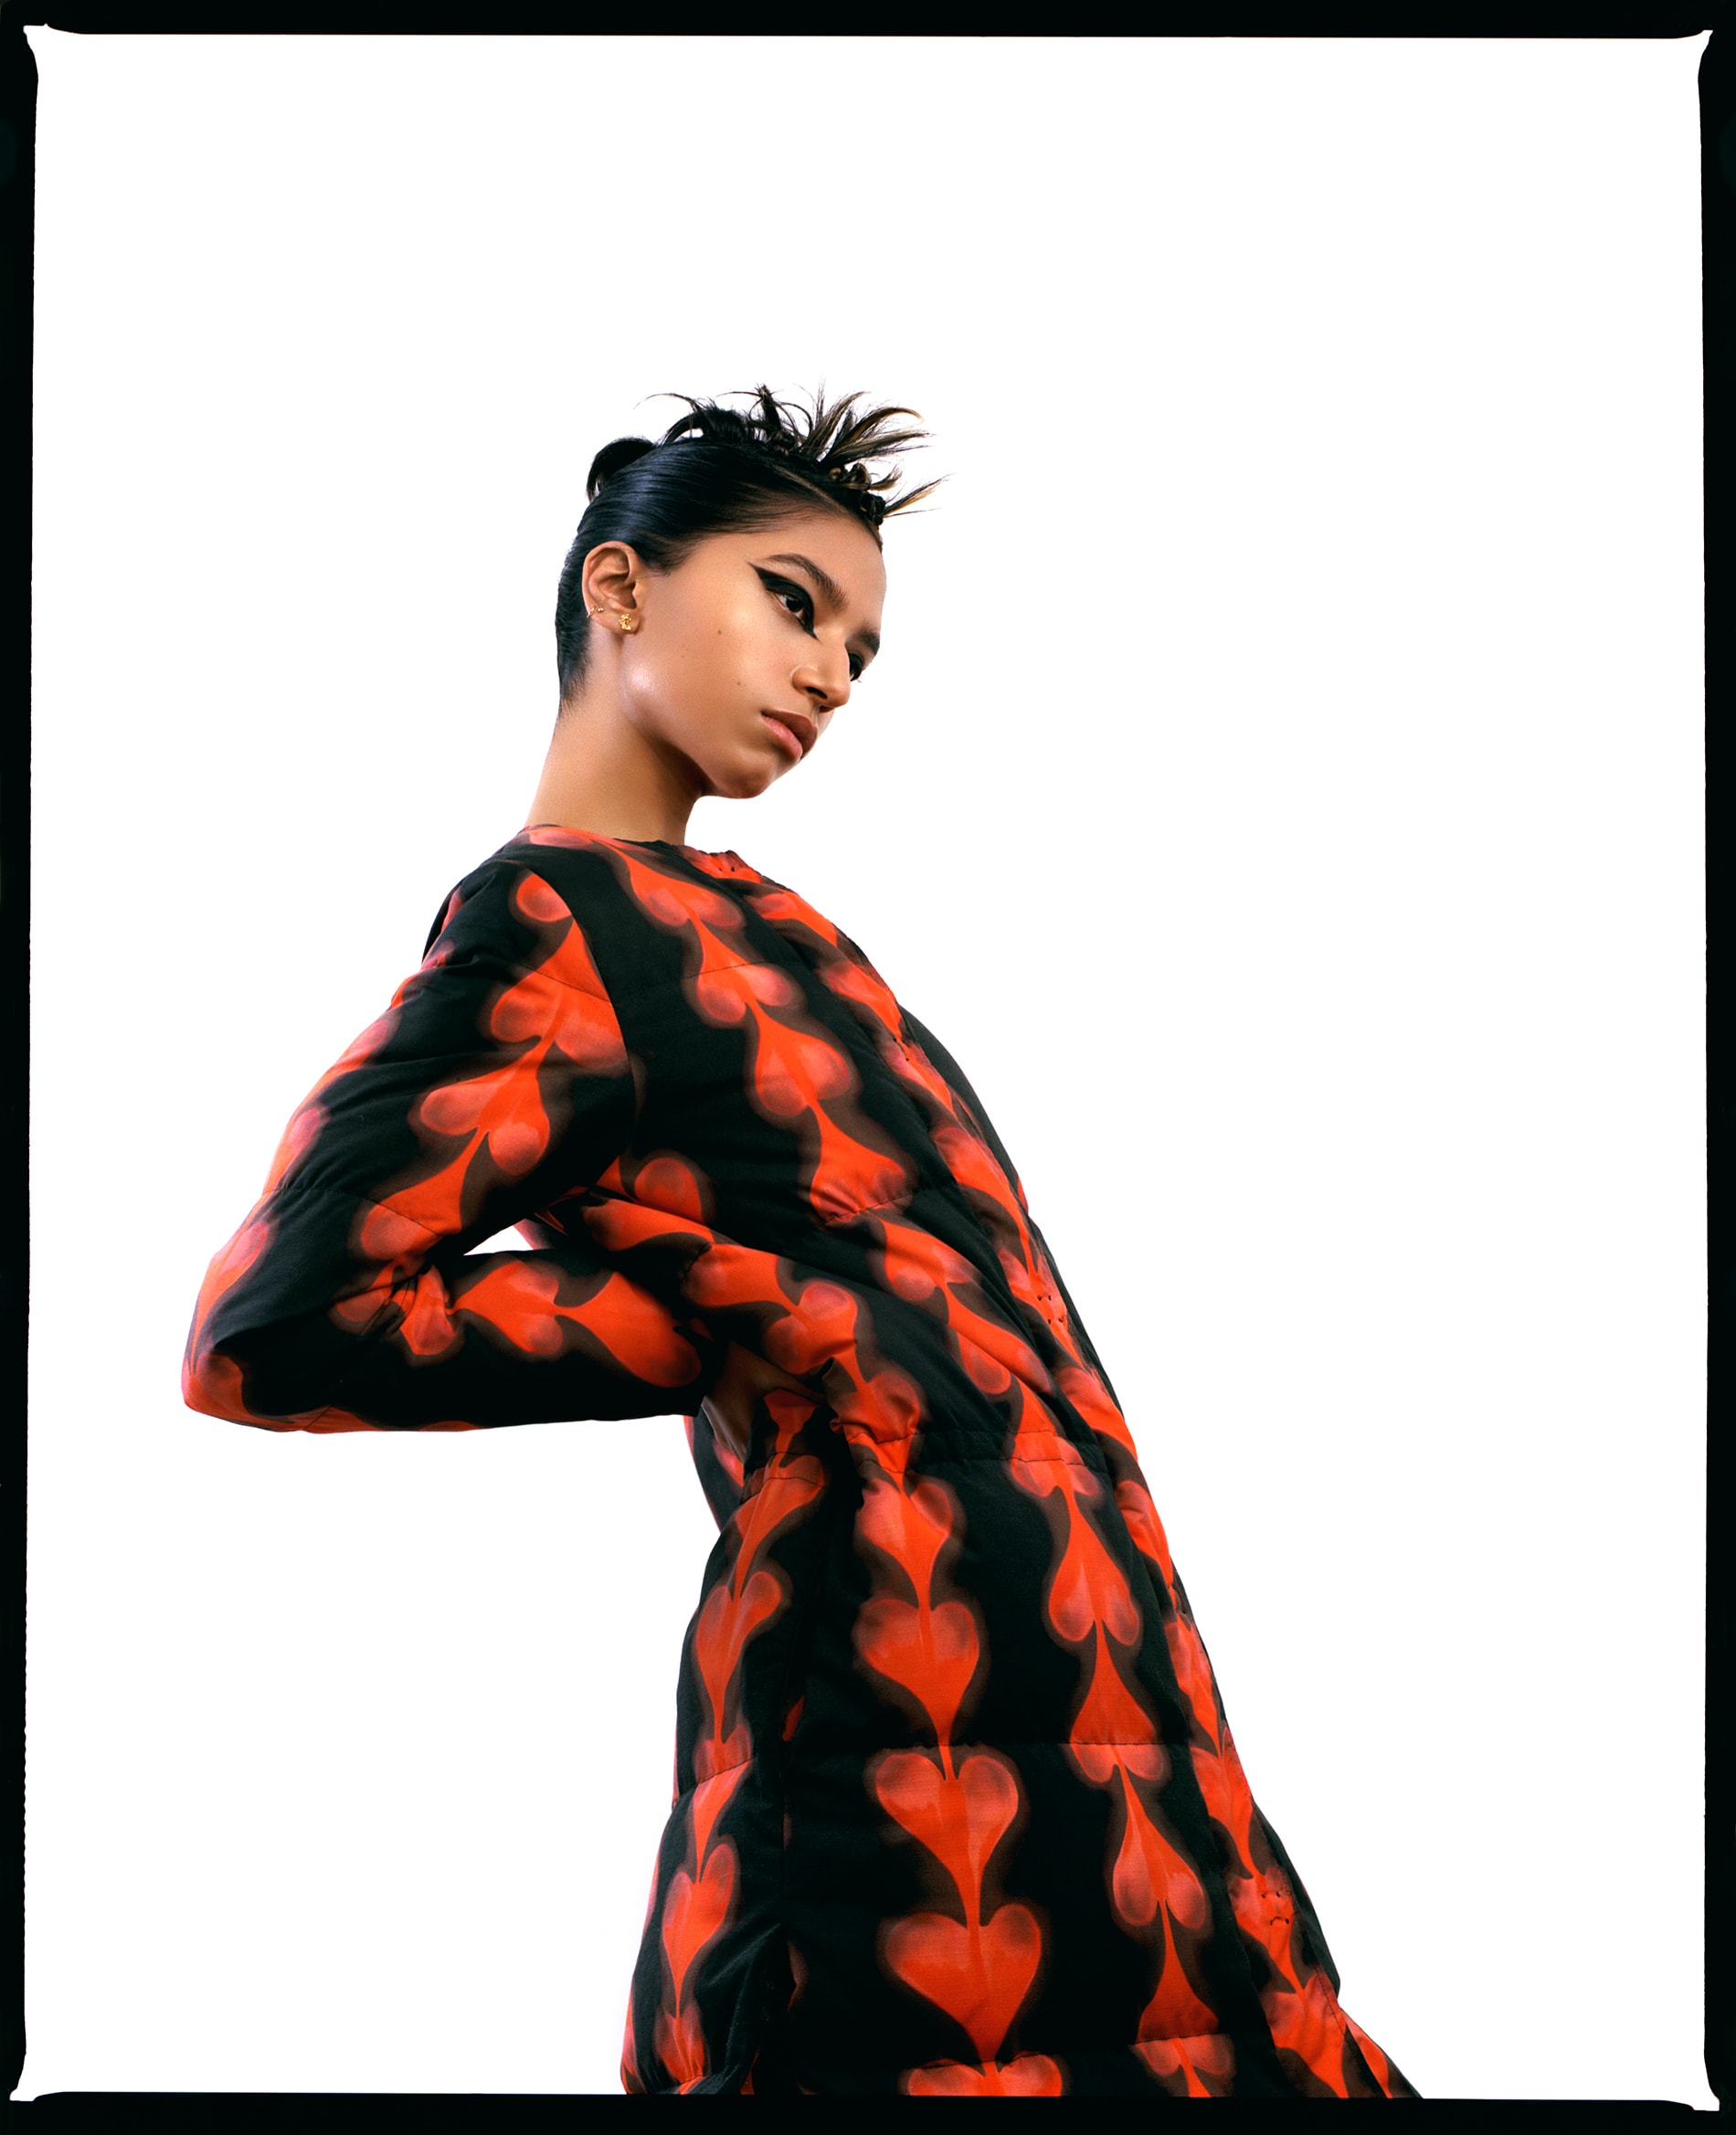 Tara Raani, queer model and actress, know for her role as Zaara Ali on the television sitcom grown-ish. Wearing a red and black jacket, dark cat eye makeup by Malisa Khamphong, spiky hair by hairstylist Jason Linkow, studio setup, white backdrop, photographed by New York fashion photographer Maria Bruun. Photographed using the Mamiya RZ67 camera and Kodak Portra film. Editorial for Flanelle Magazine.